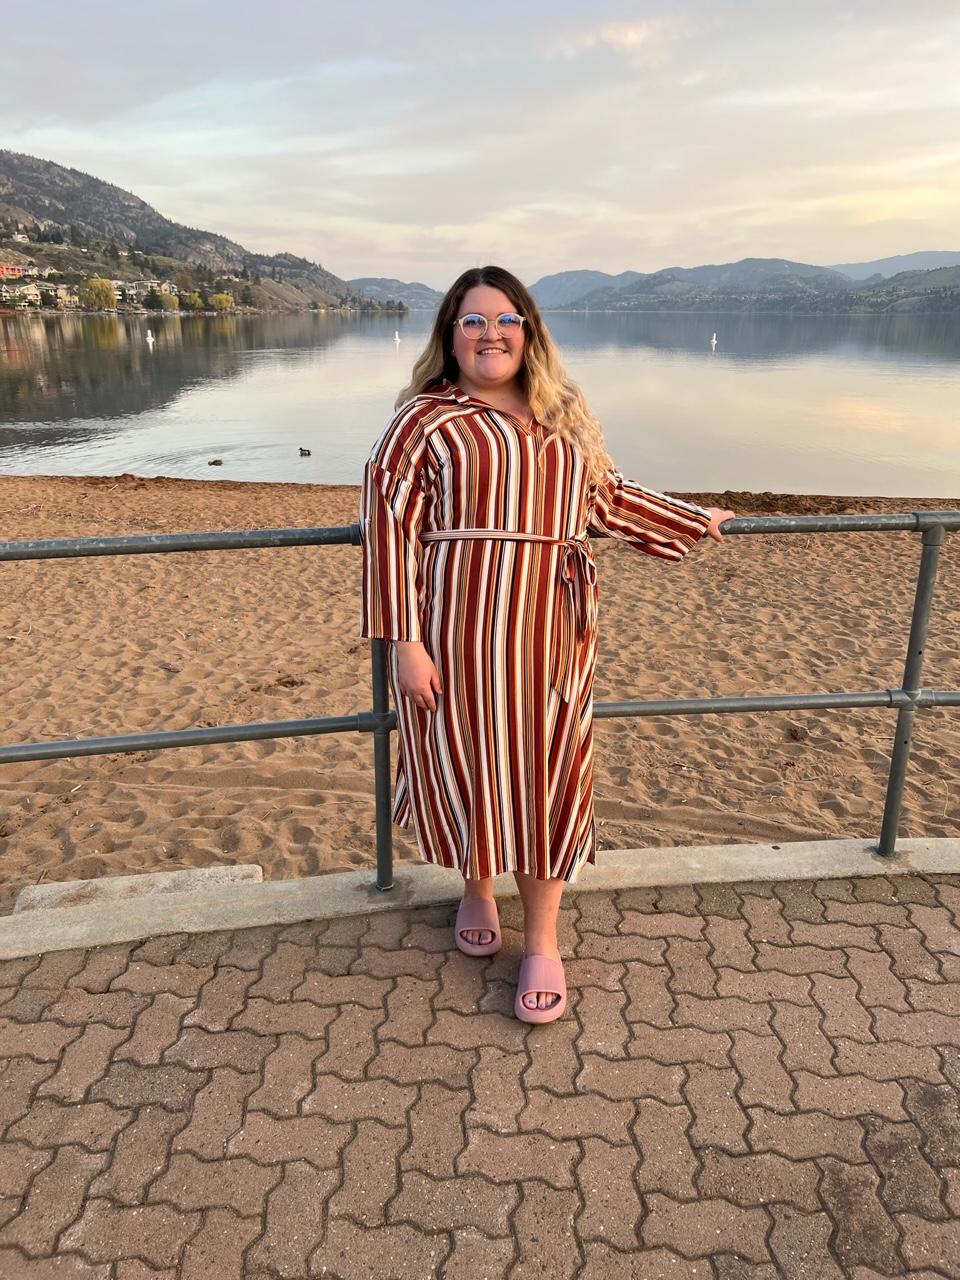 Smiling woman with long hair and glasses, wearing long striped dress with belt, sliders sandals, standing leaning against rail by beach at lake with mountains in the distance